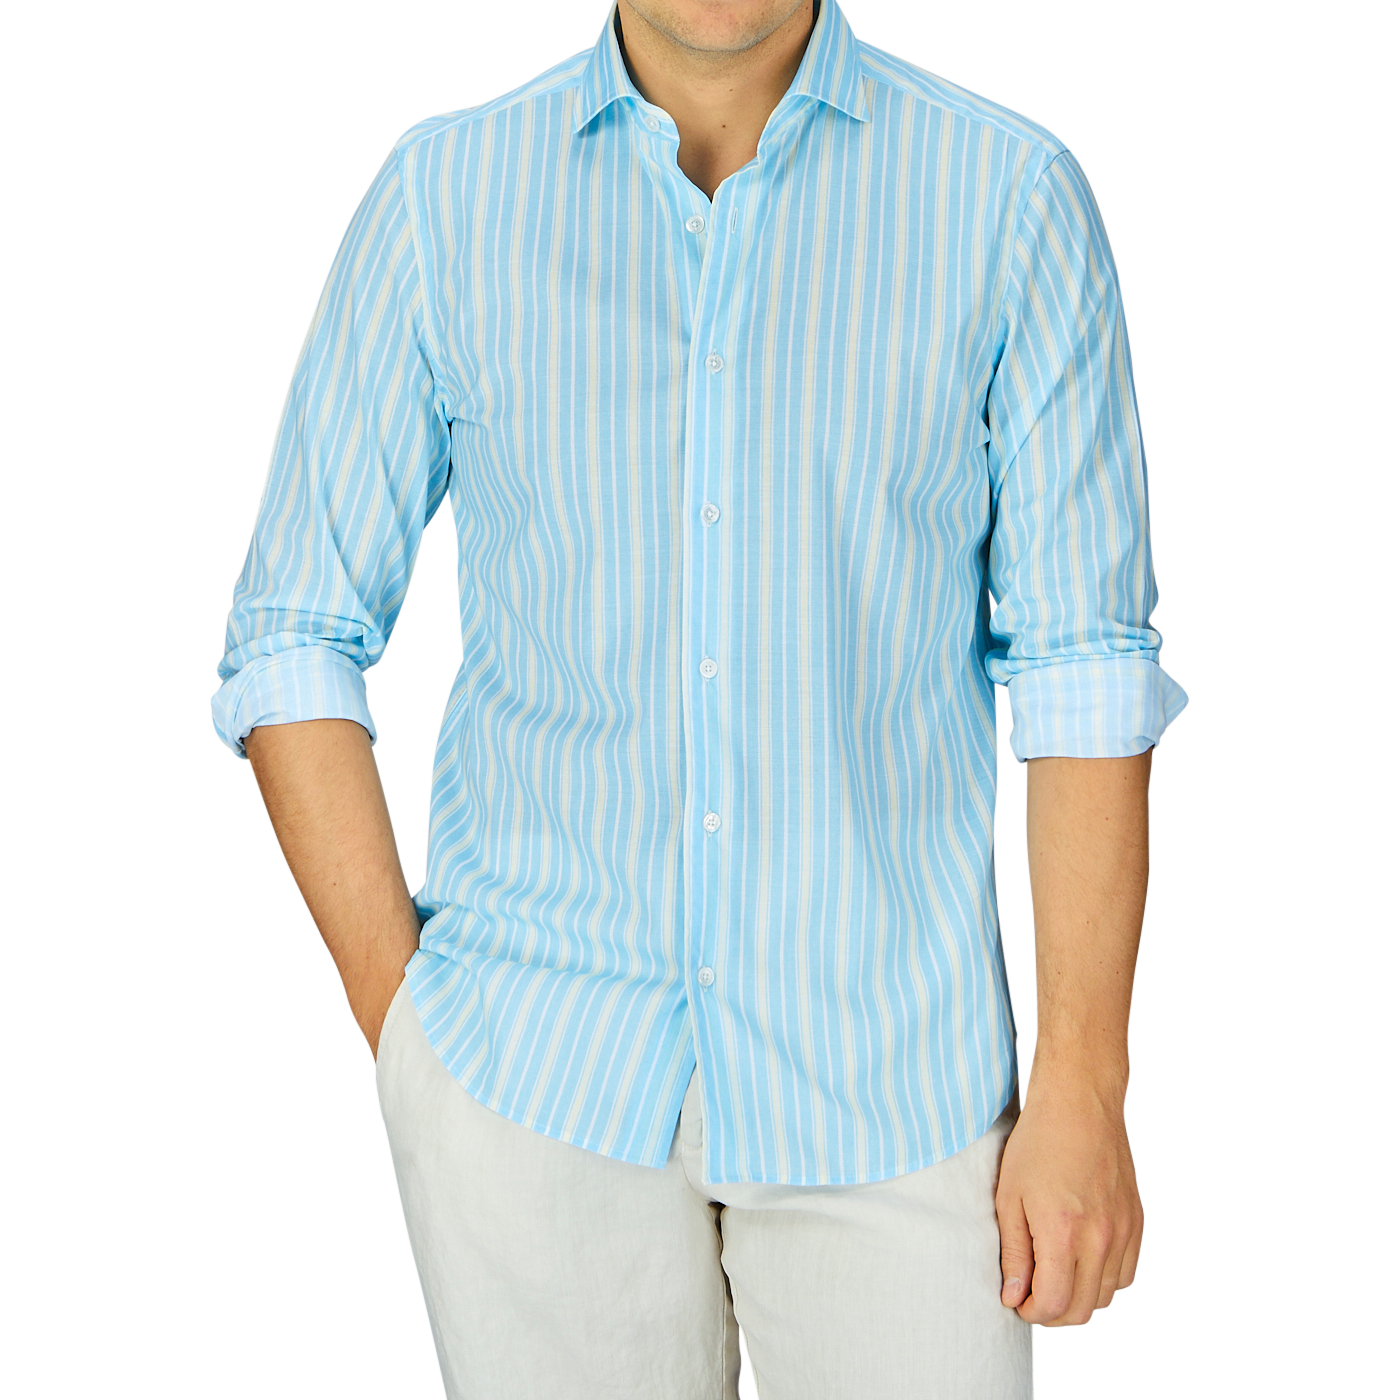 Man wearing a Fedeli Sky Blue Yellow Striped Cotton Beach Shirt, with blue and white stripes and light-colored pants against a gray background.